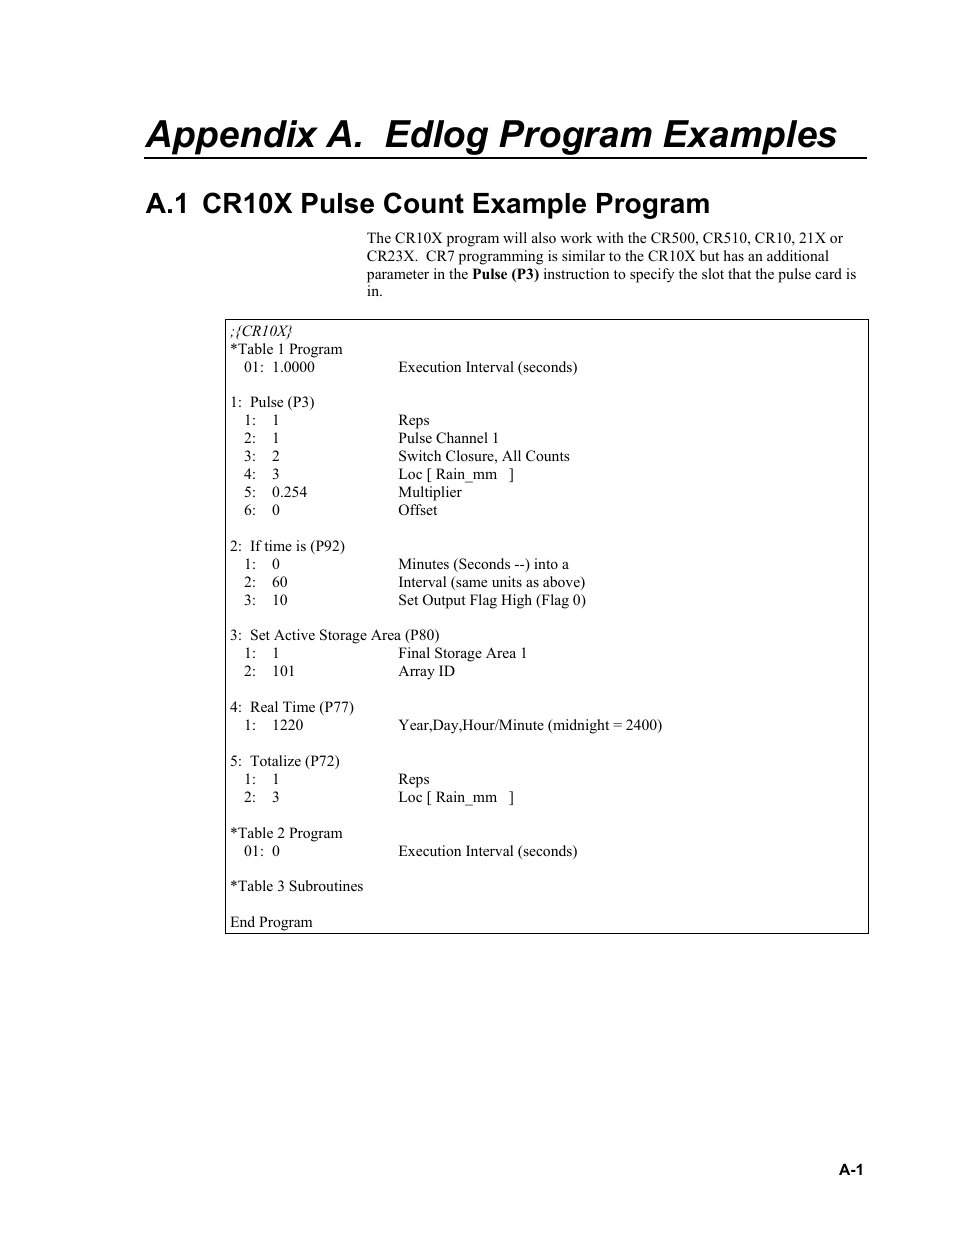 Appendix a. edlog program examples, A.1 cr10x pulse count example program | Campbell Scientific TE525, TE525WS, and TE525MM Texas Electronics Rain Gages User Manual | Page 21 / 24